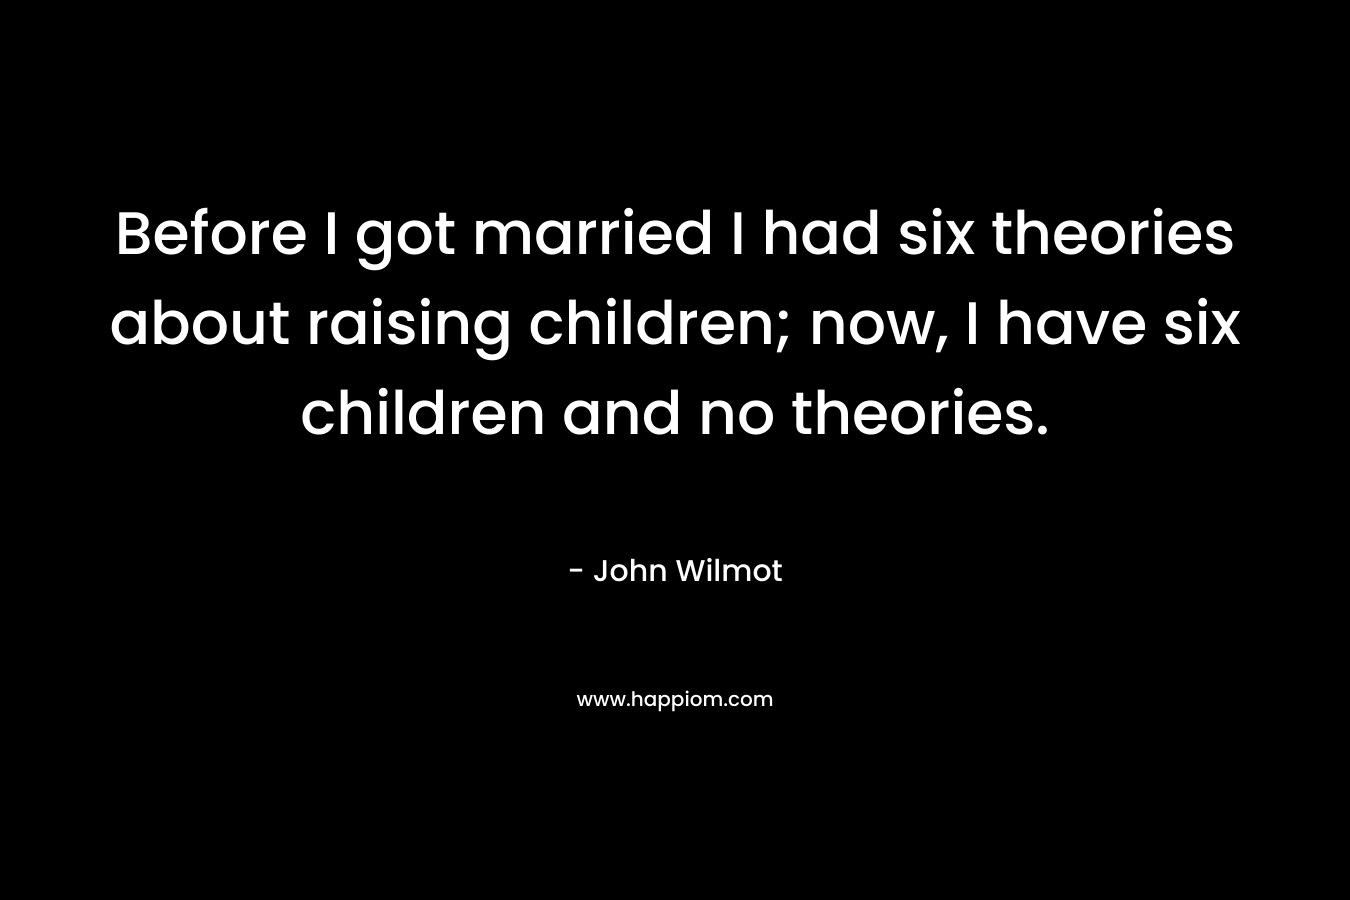 Before I got married I had six theories about raising children; now, I have six children and no theories.